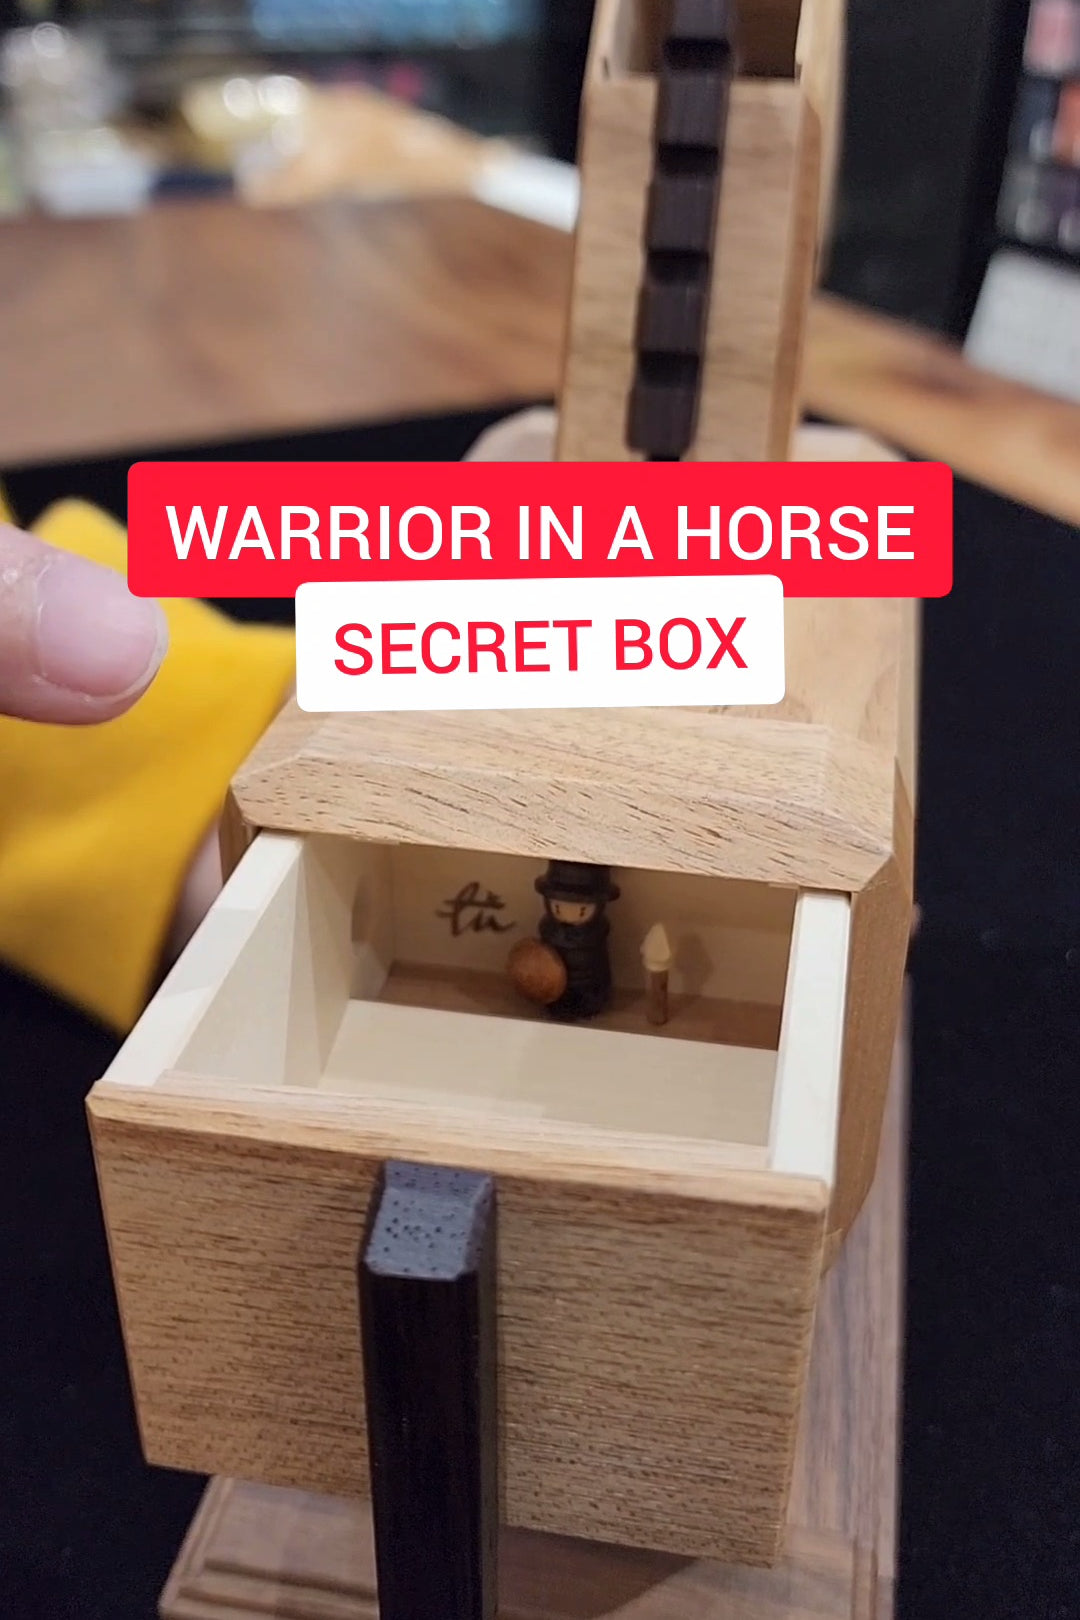 How to Open the Warrior in a Horse Secret Box